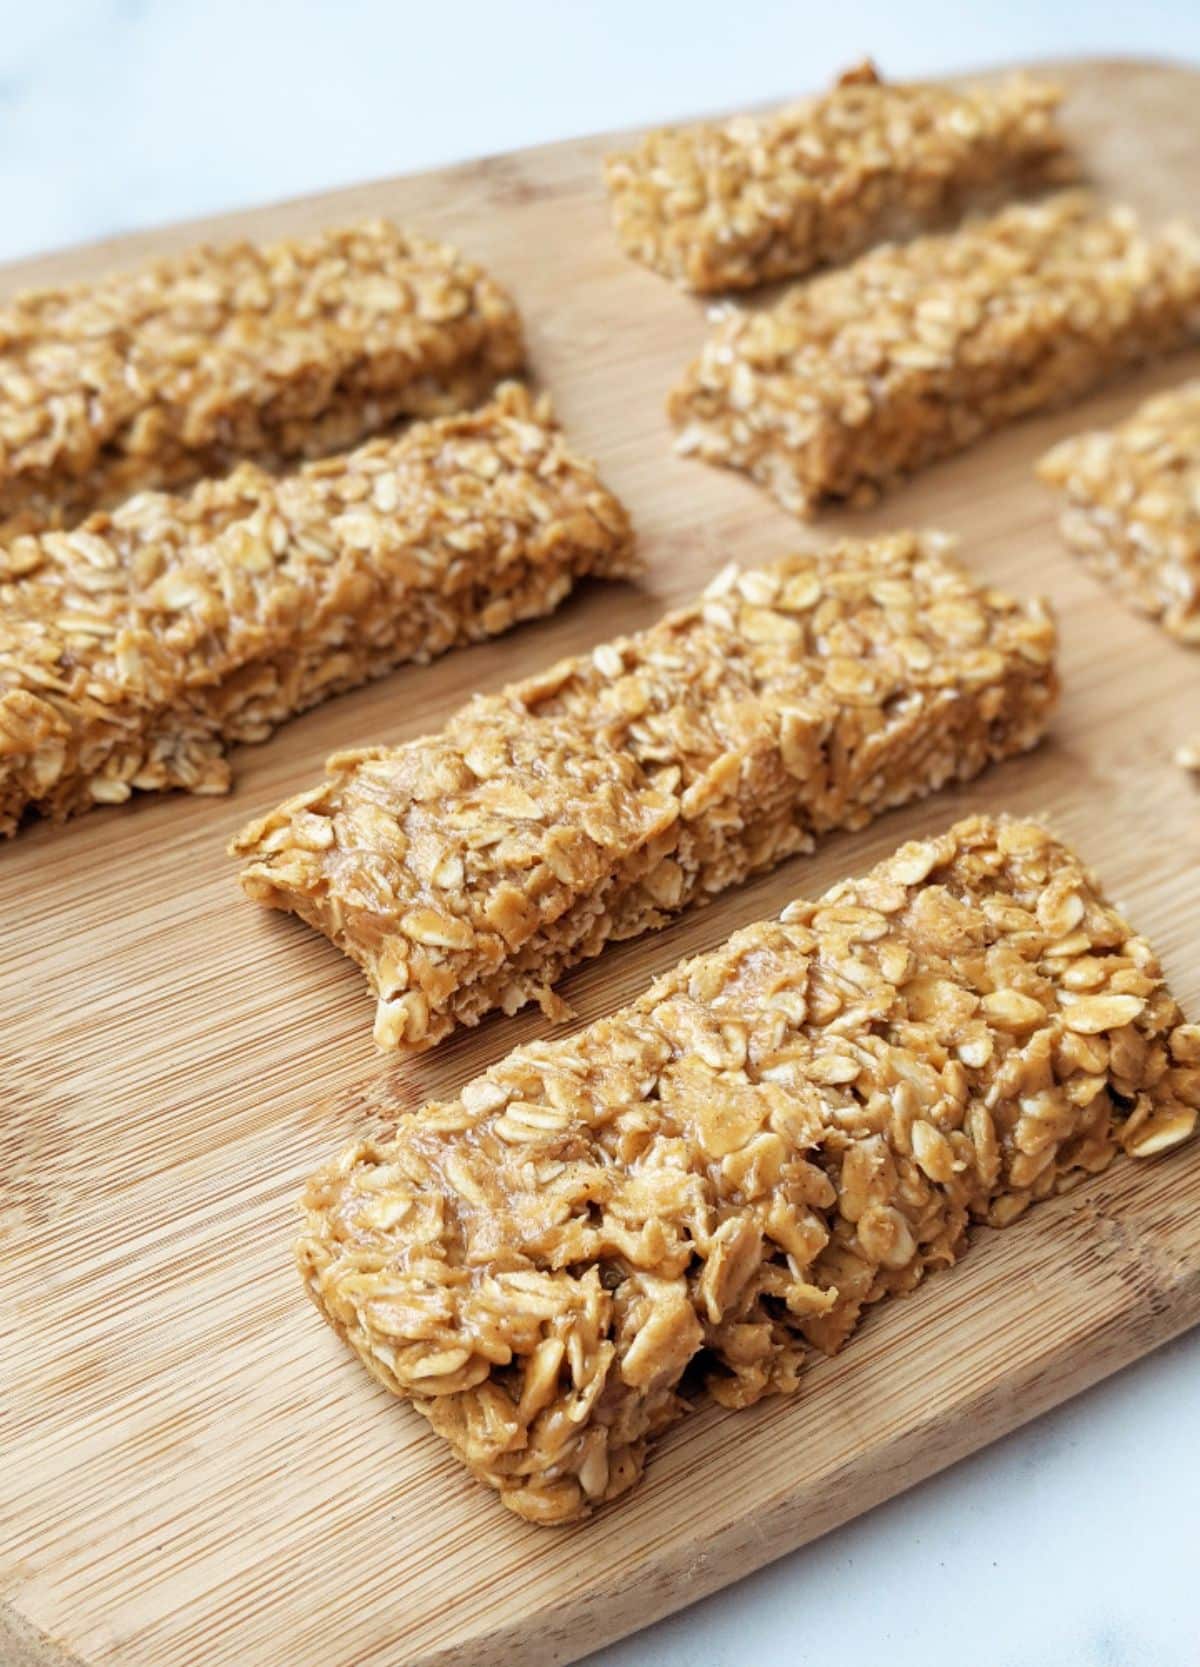 Healthy Ingredient No-Bake Granola Bars on a wooden tray.